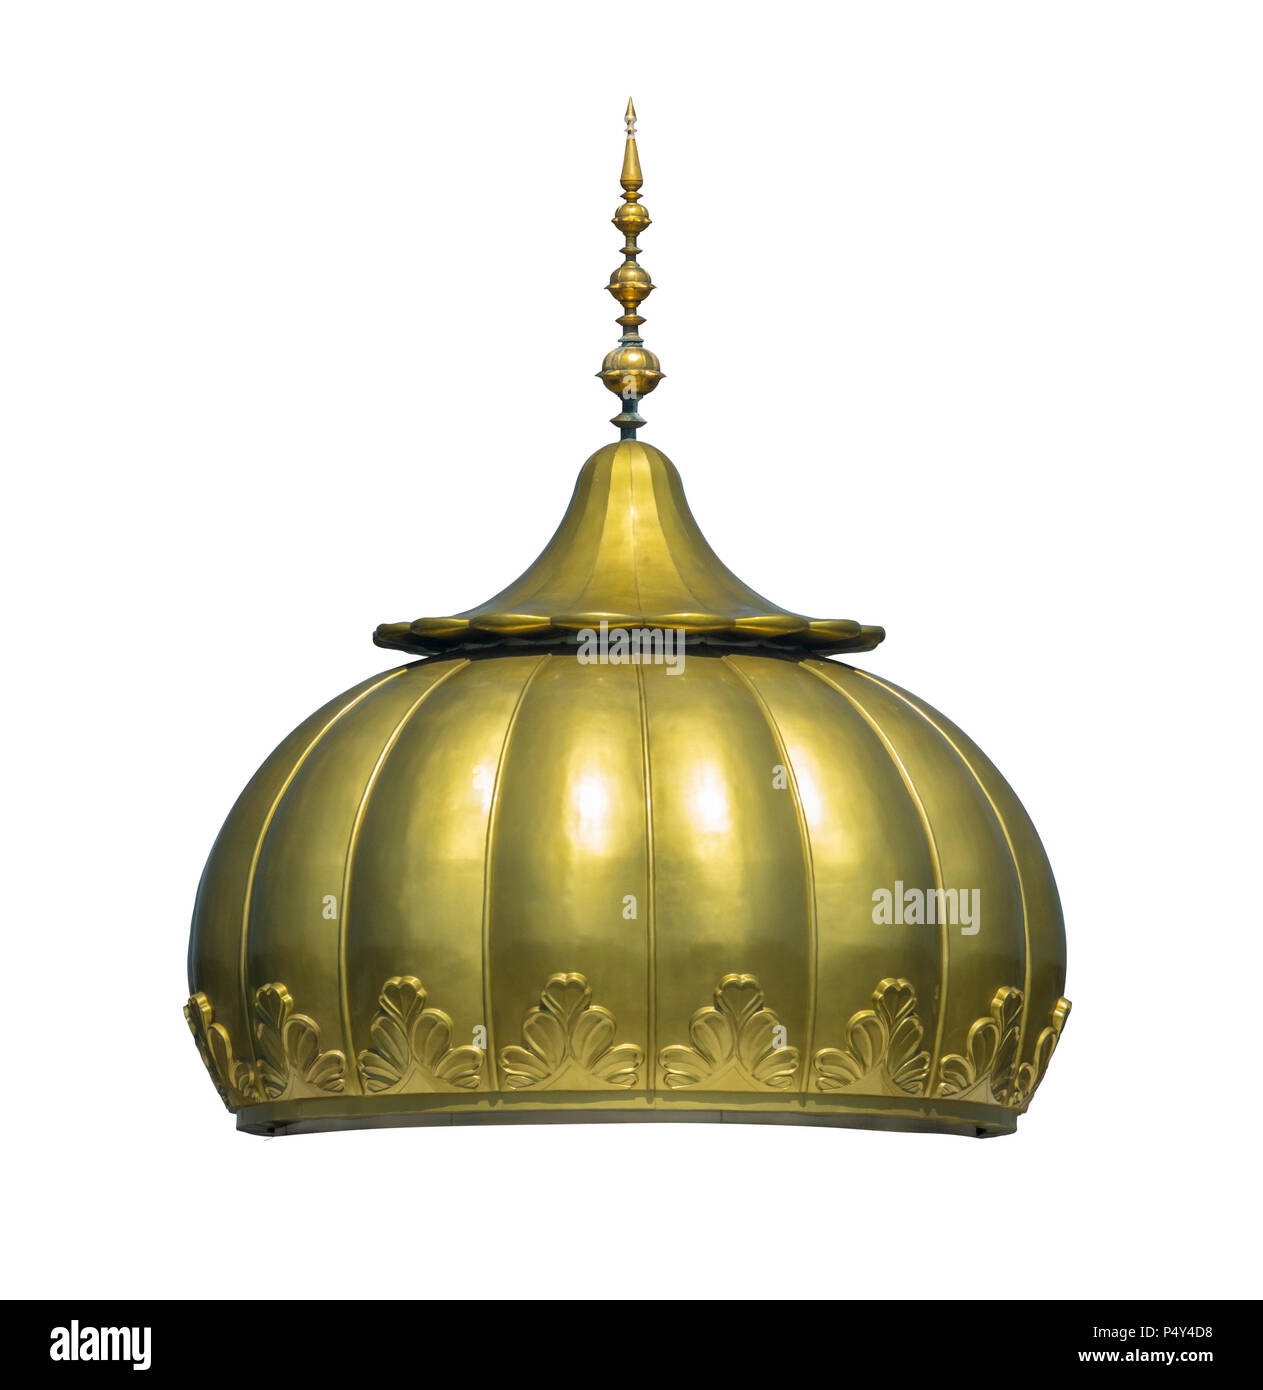 Isolated Golden Dome Of A Sikh Gurdwara Temple Stock Photo